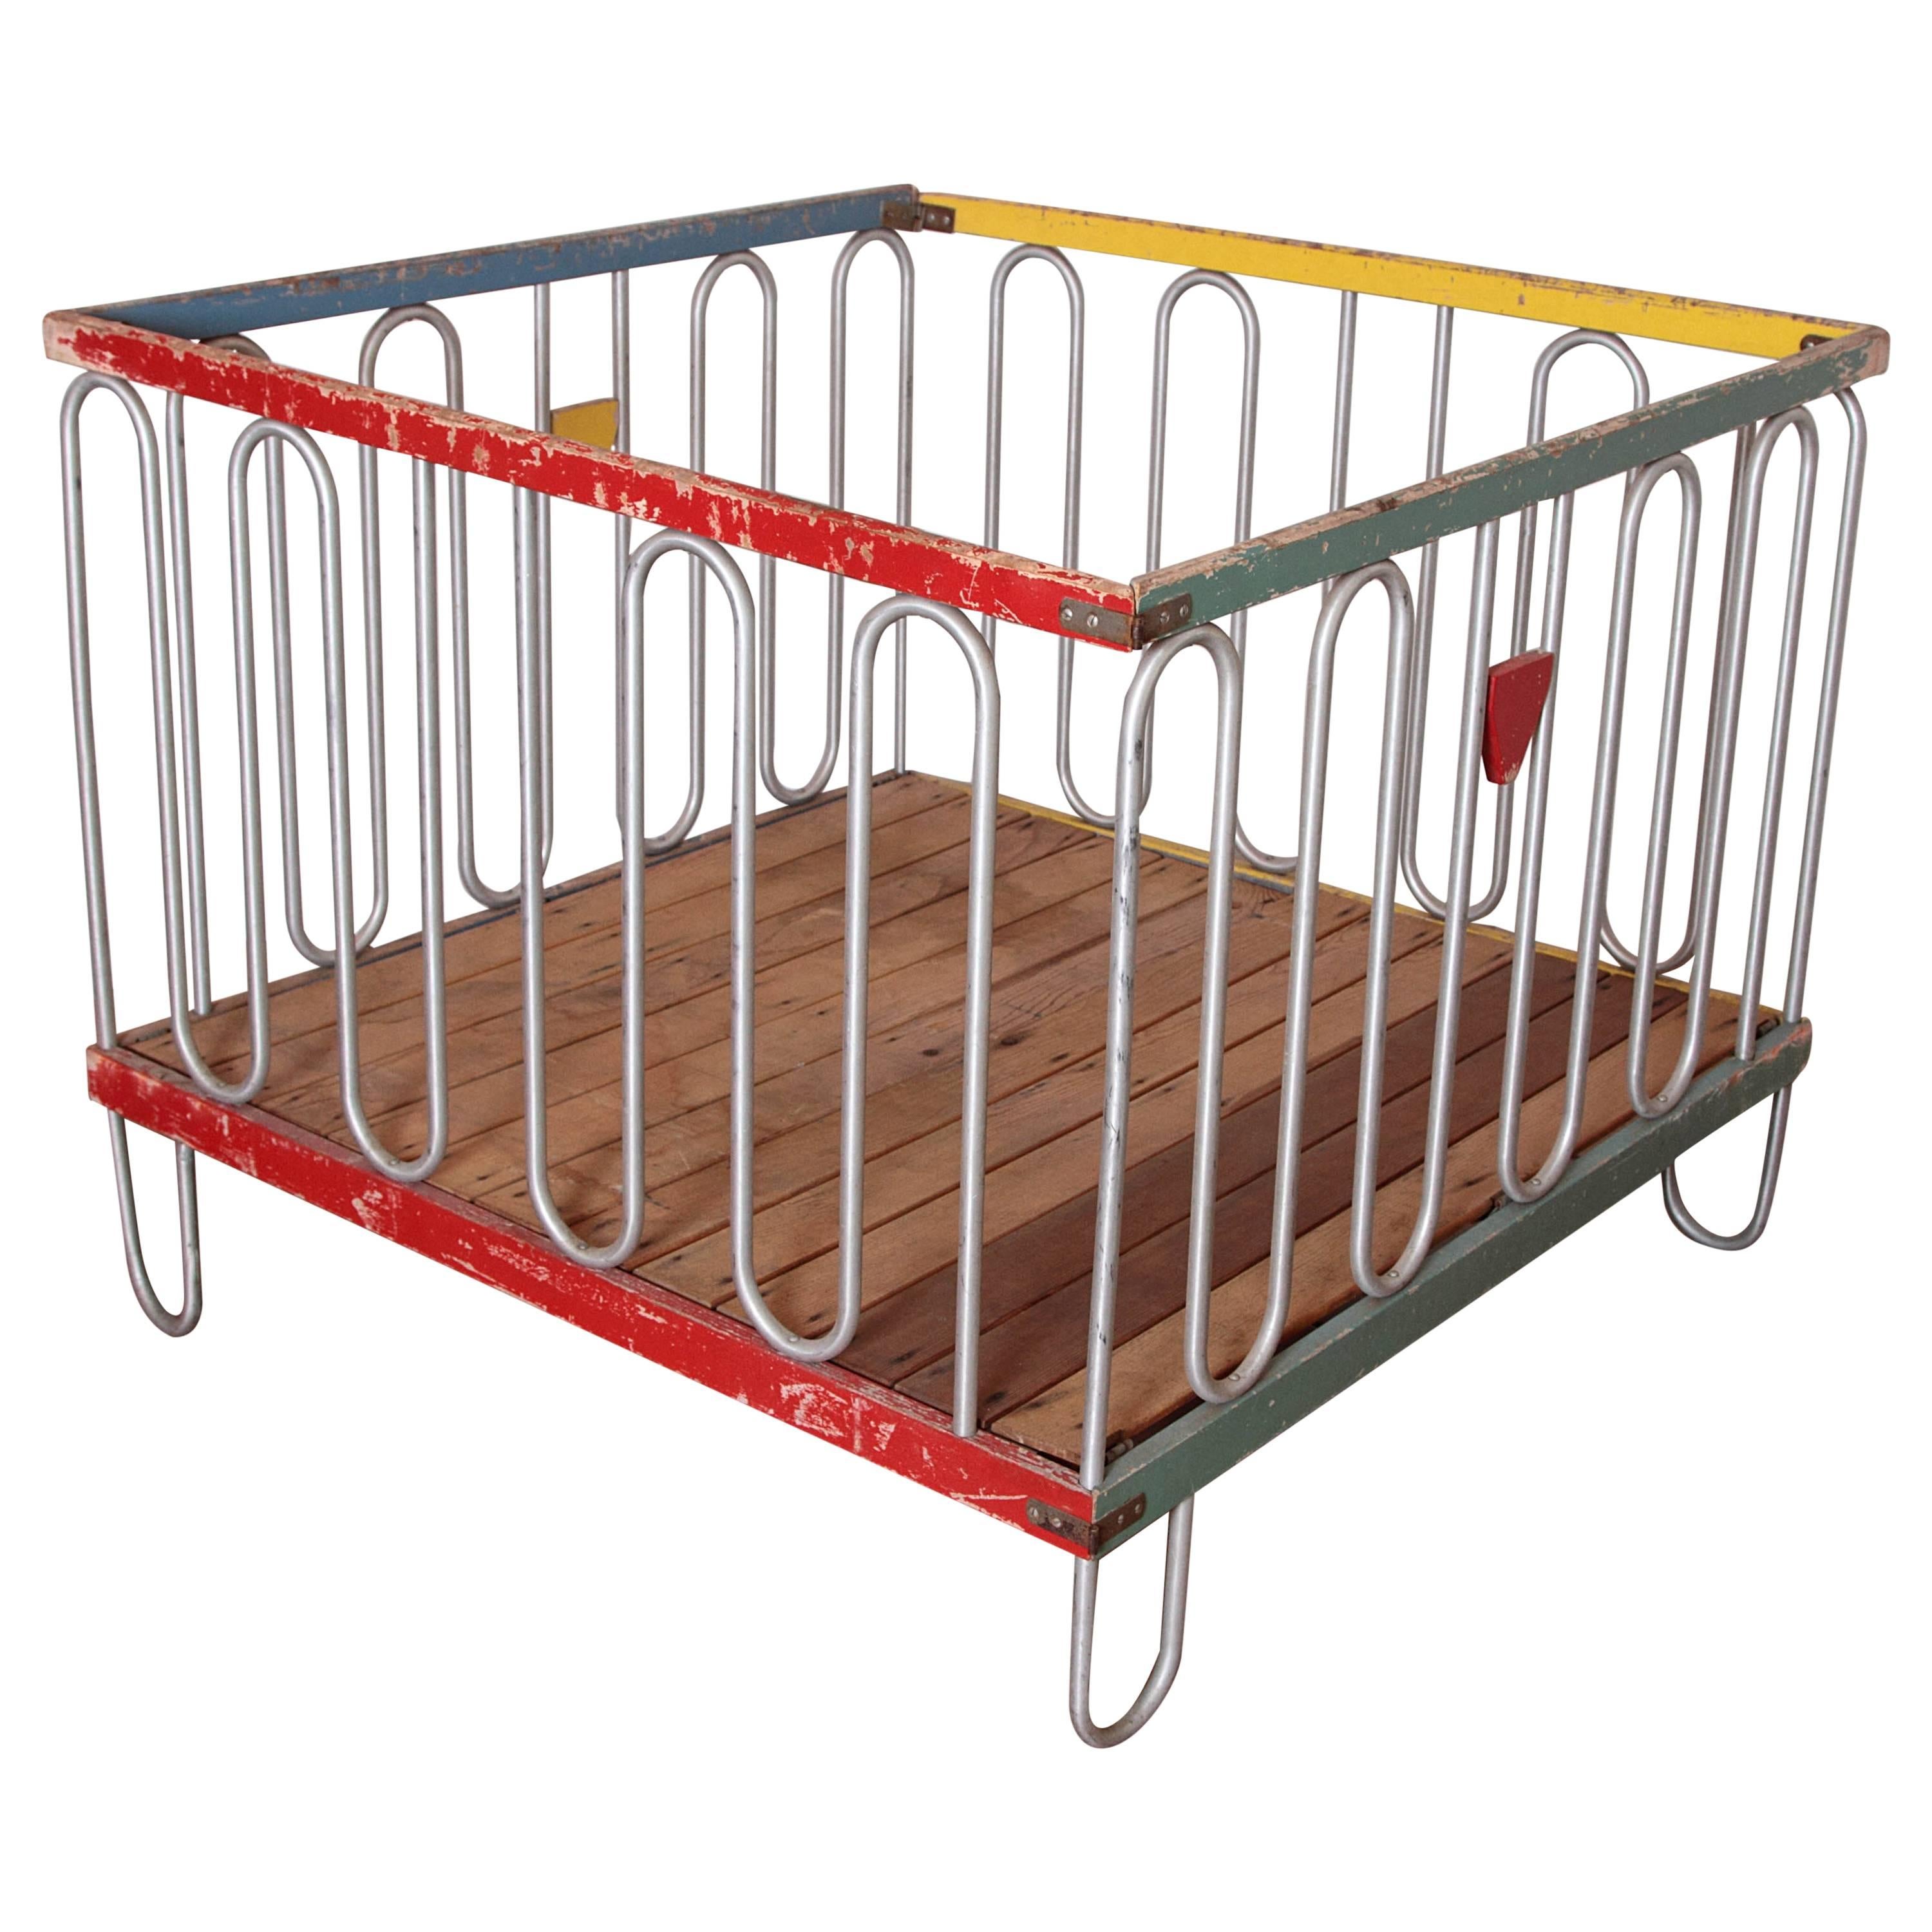 Streamline Modernist Art Deco Collapsible Playpen or Crib after Gilbert Rohde